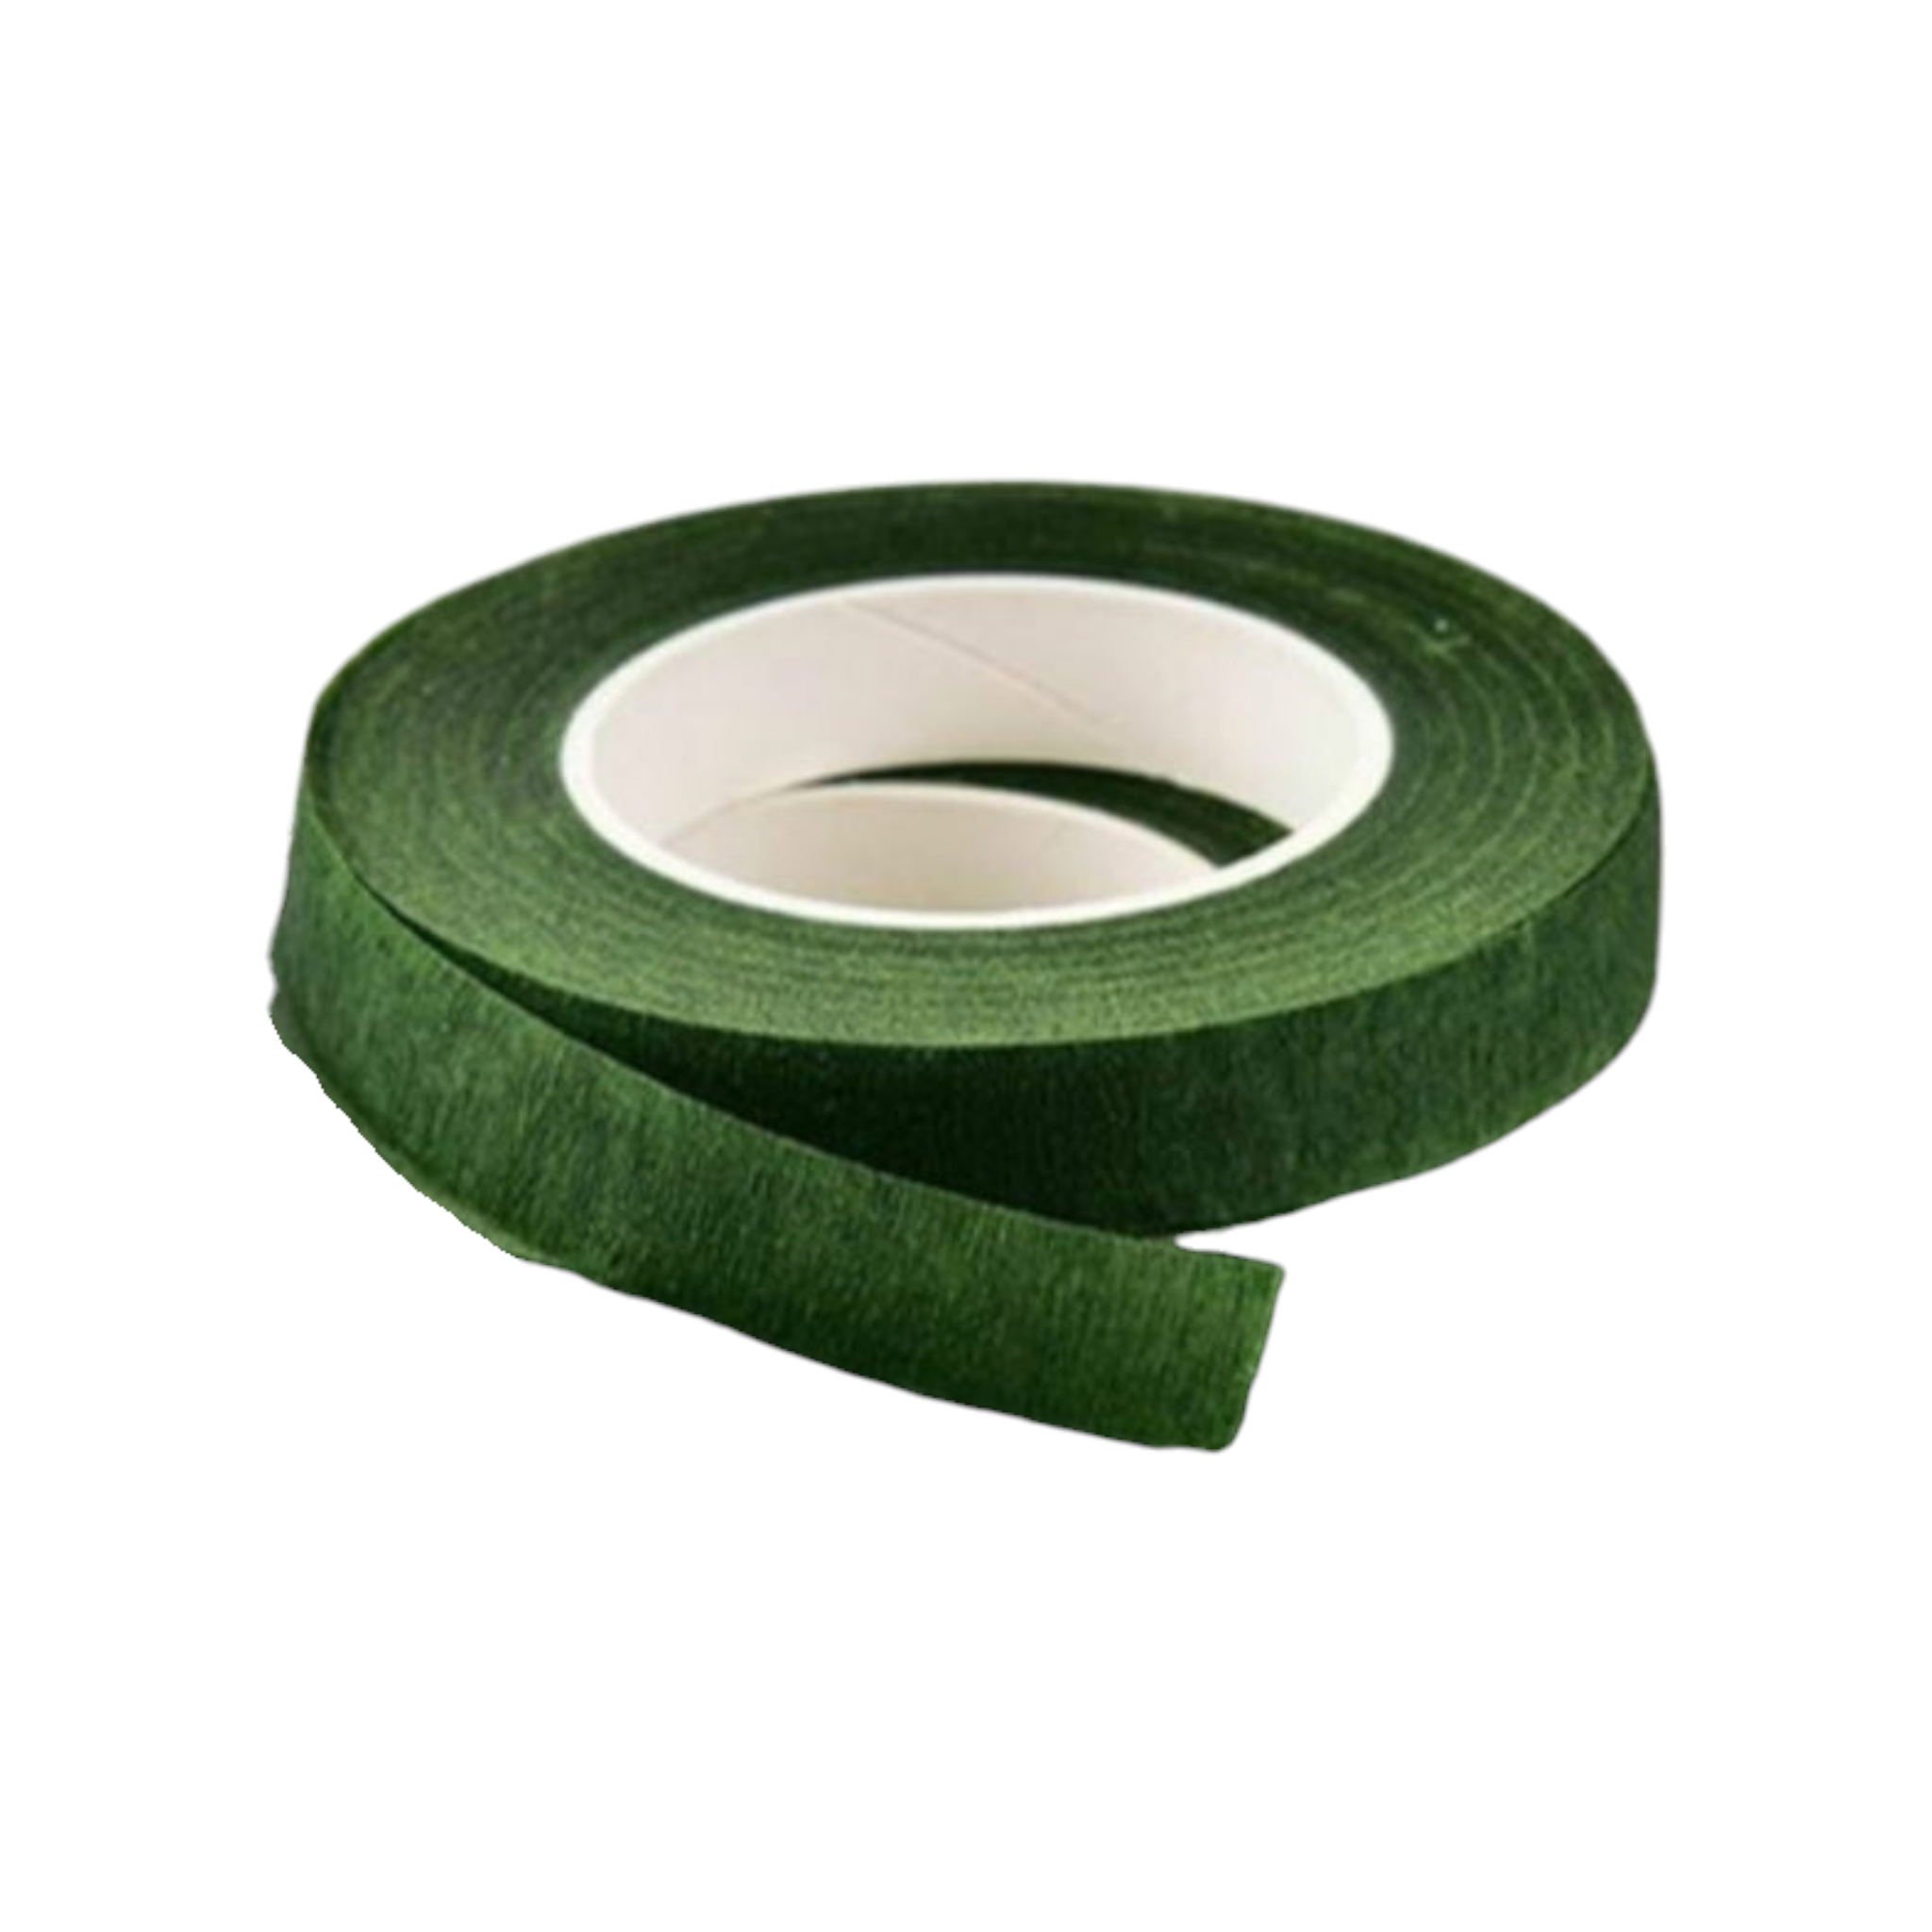 Floral Tape Green 1.2cmx27m 30-Yards